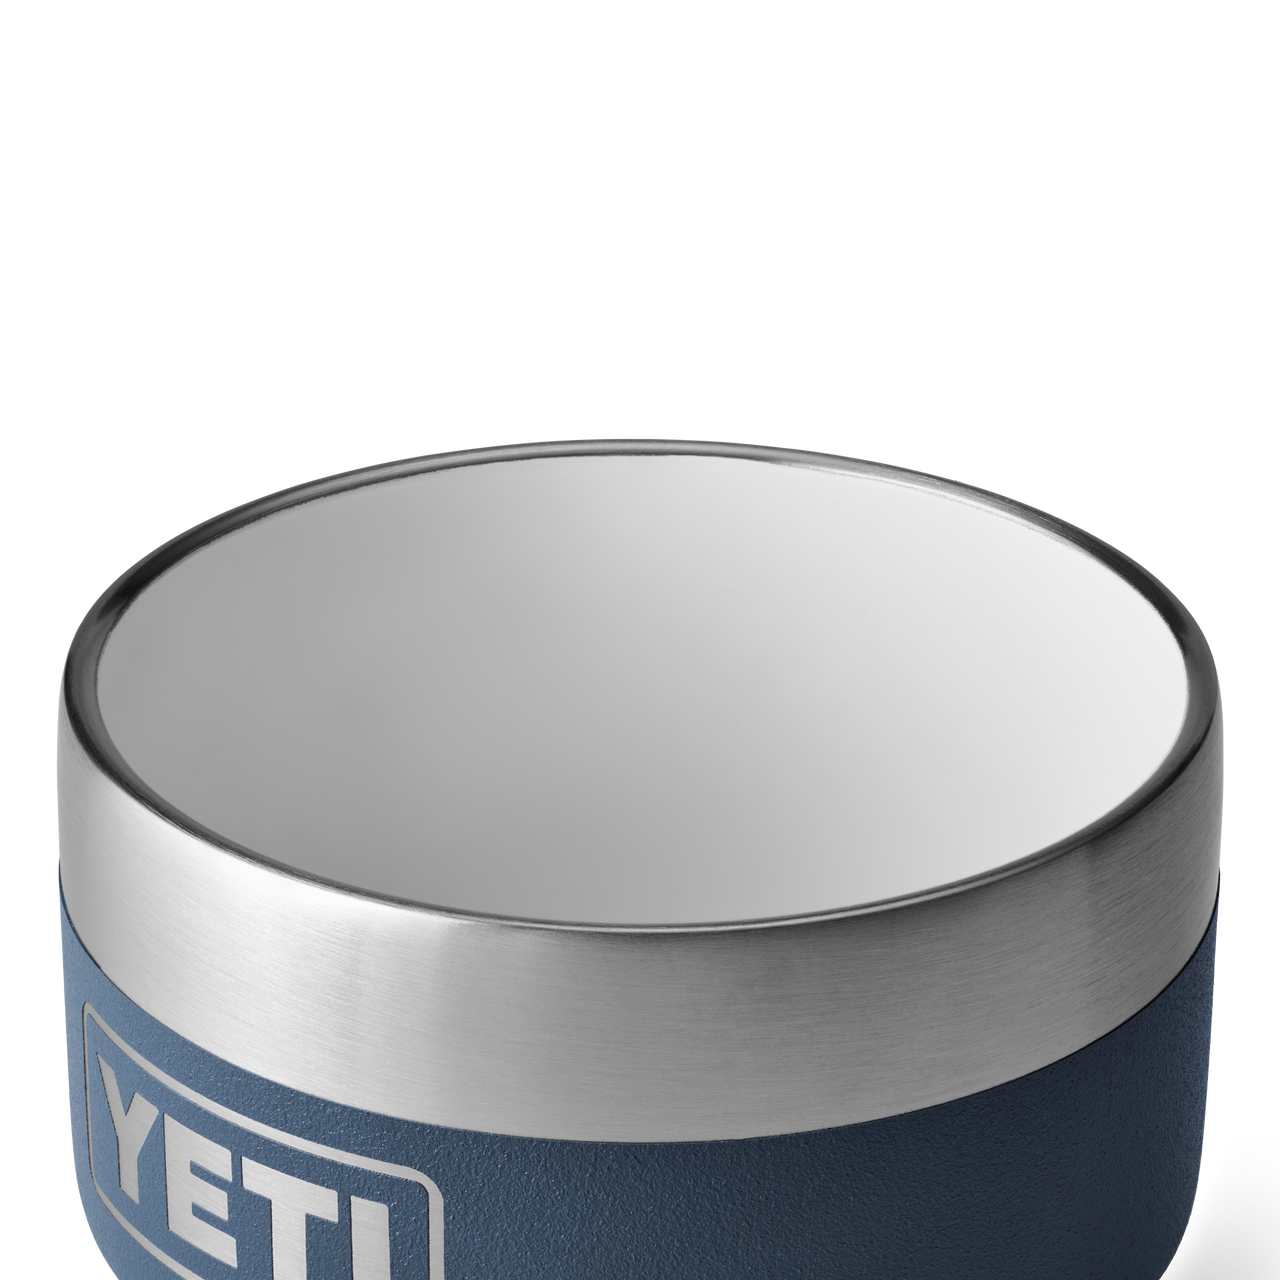 YETI Navy Rambler 4 oz Stackable Cups (2 Pack)